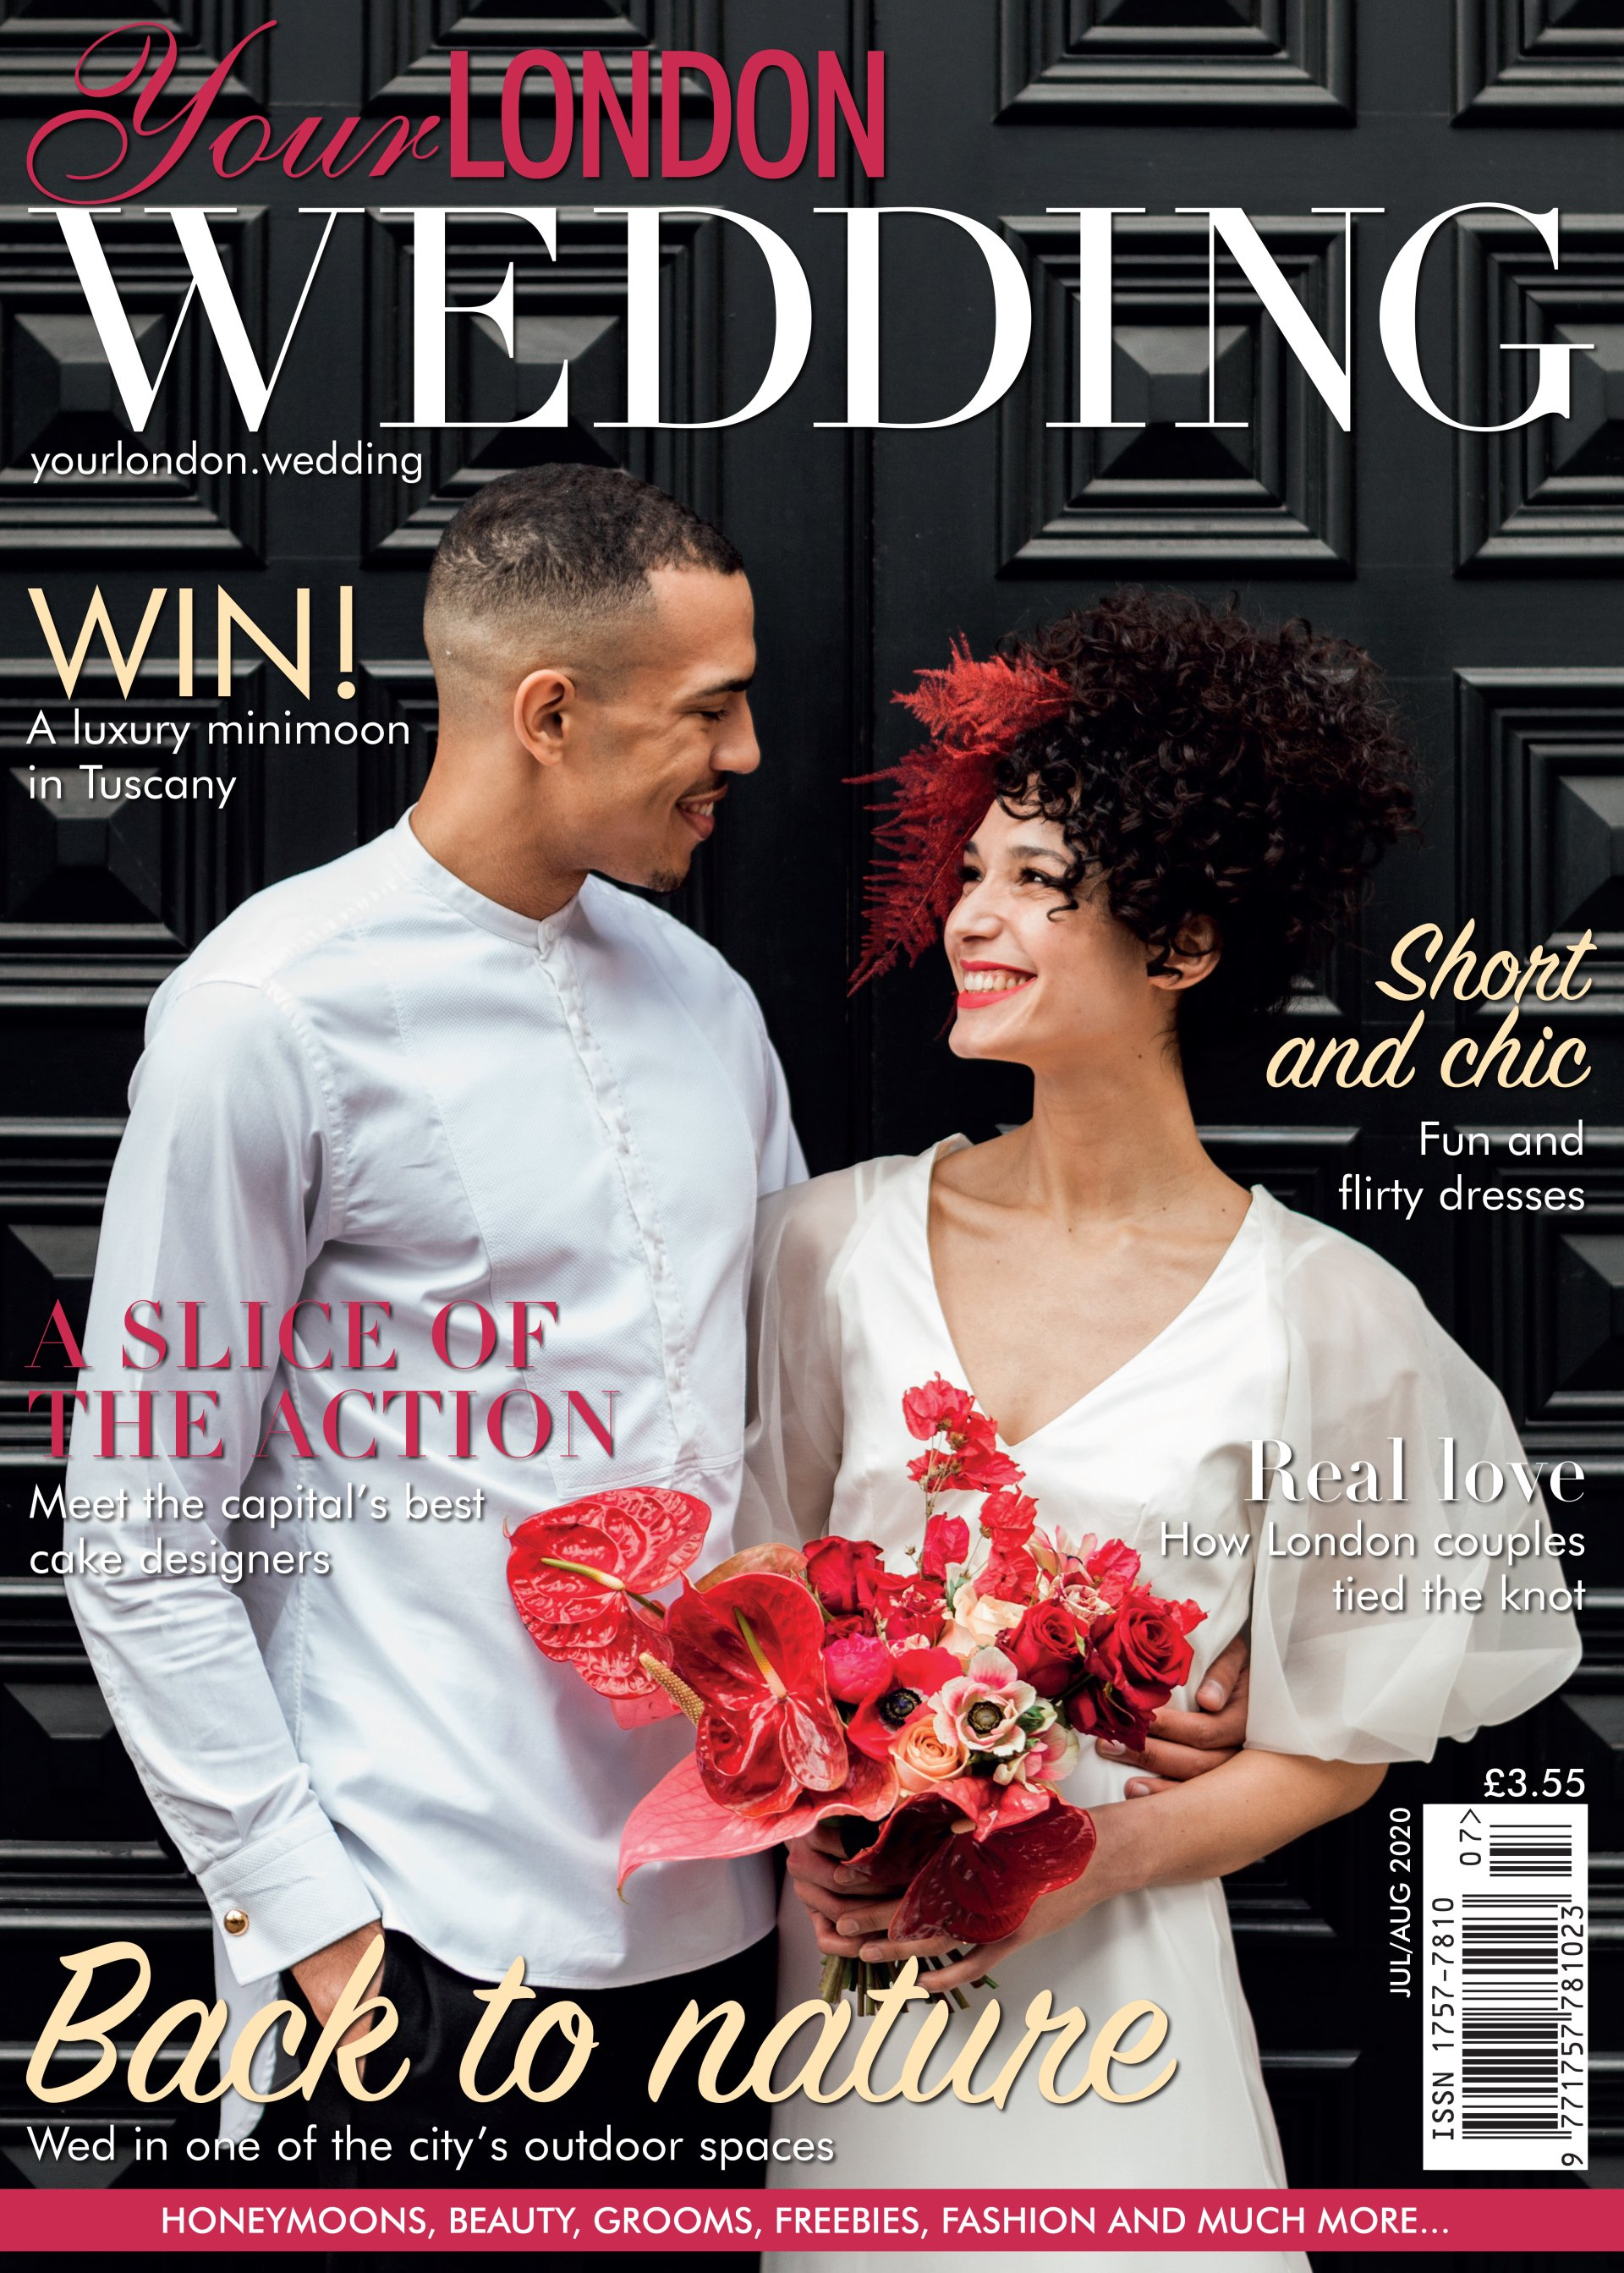 London Wedding magazine front cover, bride and groom look into each other eye's